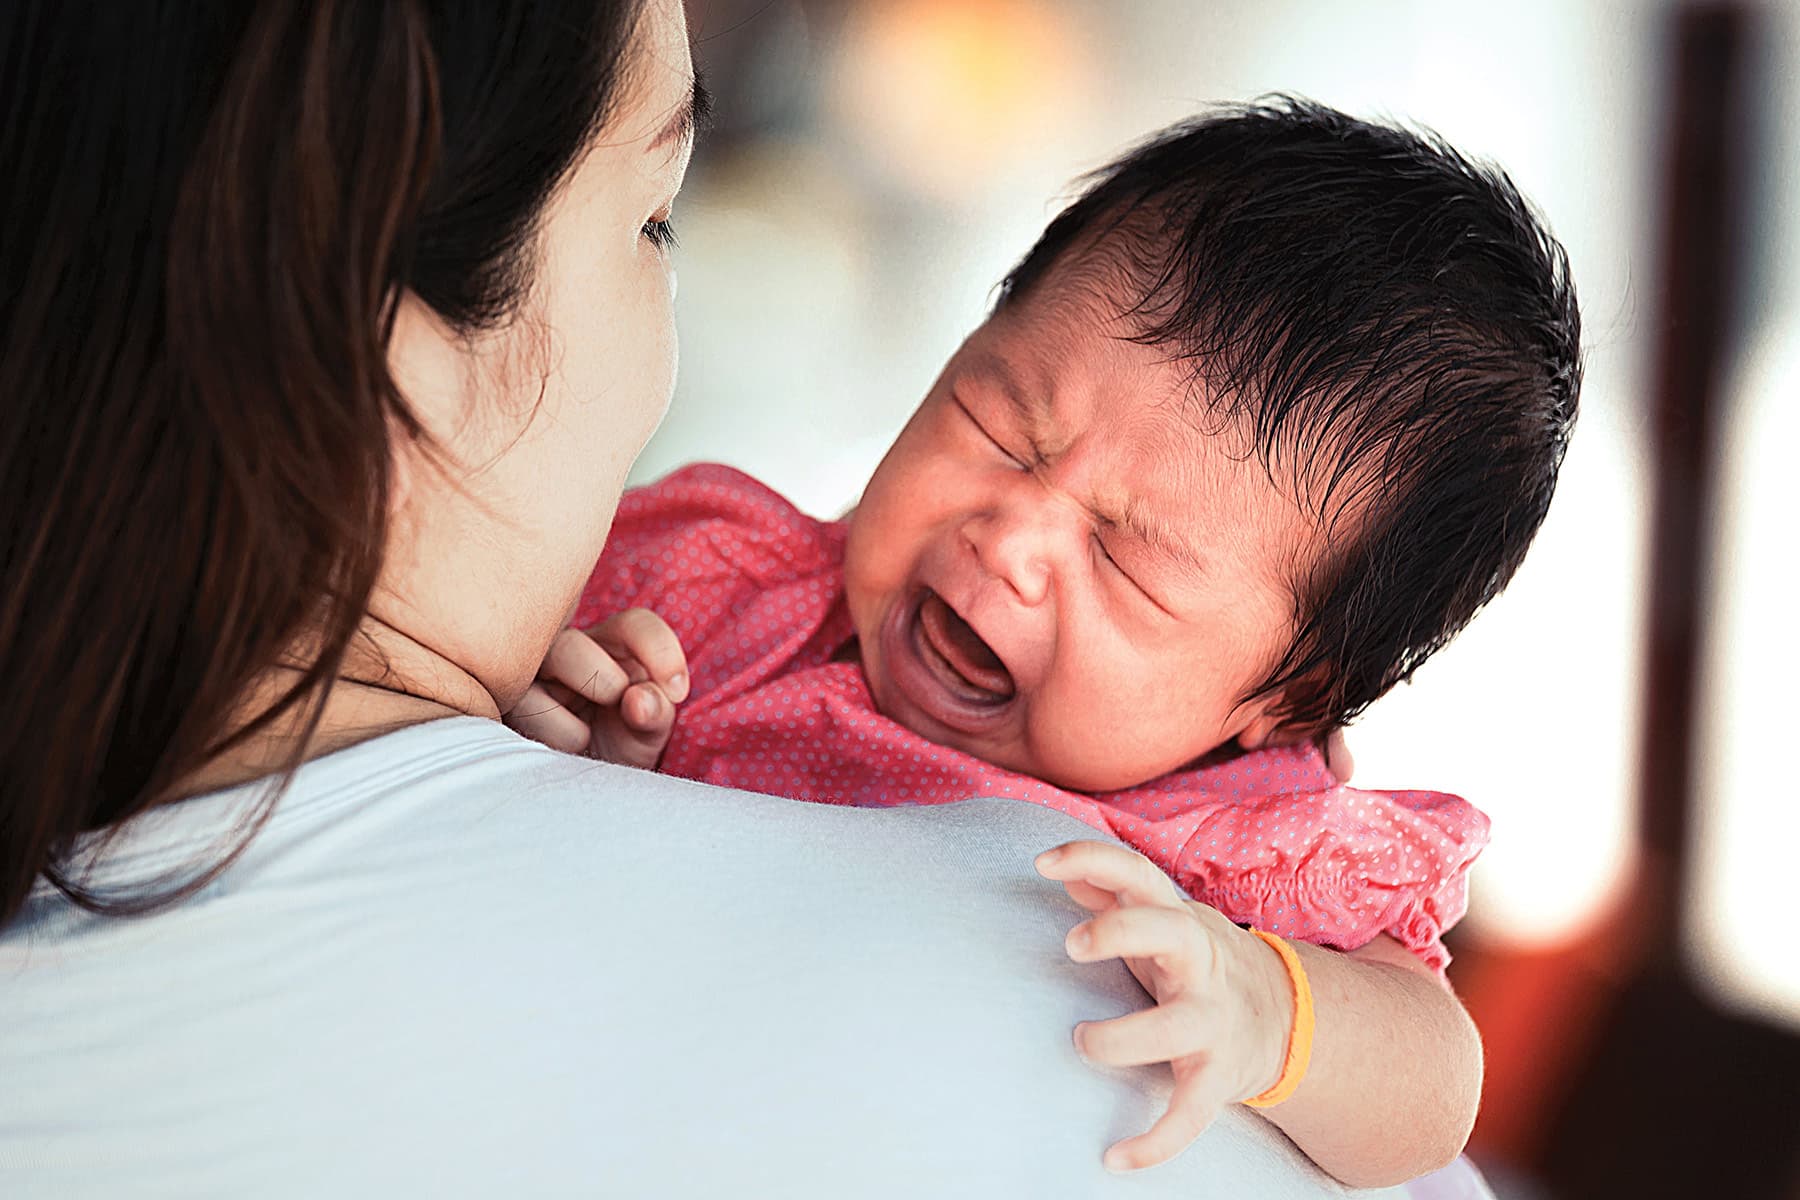 What Works Best to Help Baby Stop Crying?